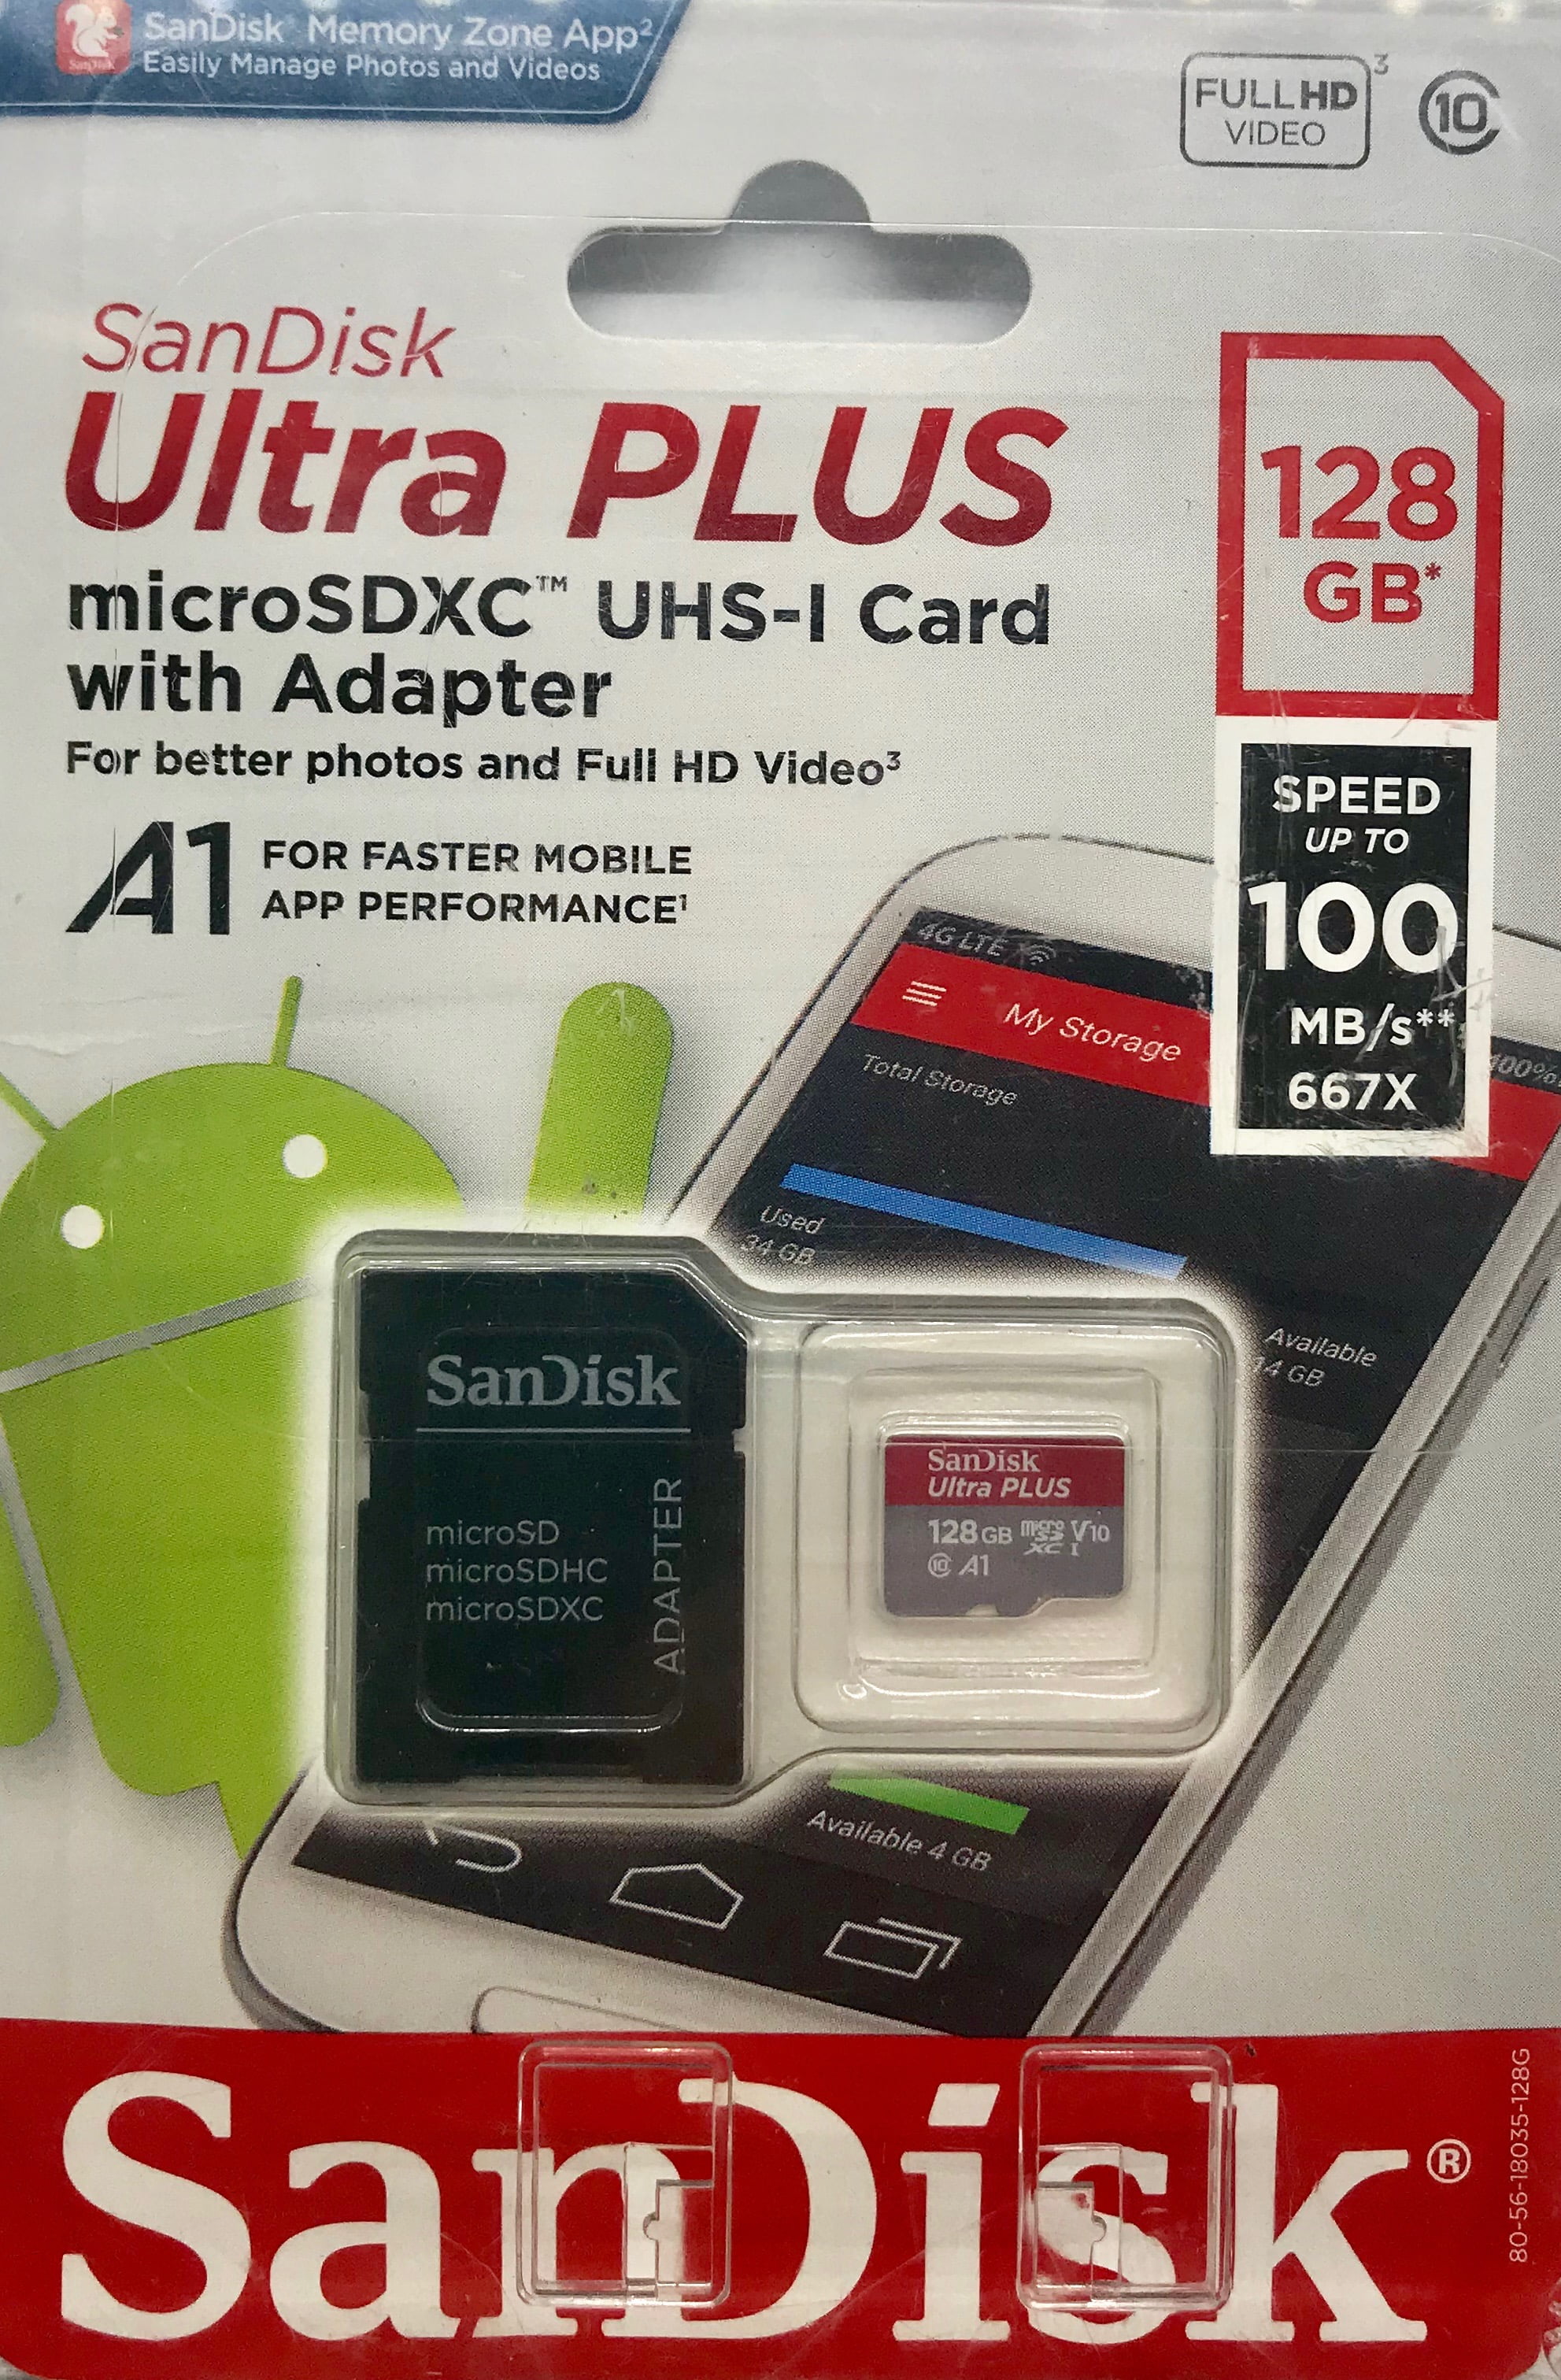 SanDisk Ultra 128GB MicroSDXC Verified for Toshiba Excite Go by SanFlash 100MBs A1 U1 C10 Works with SanDisk